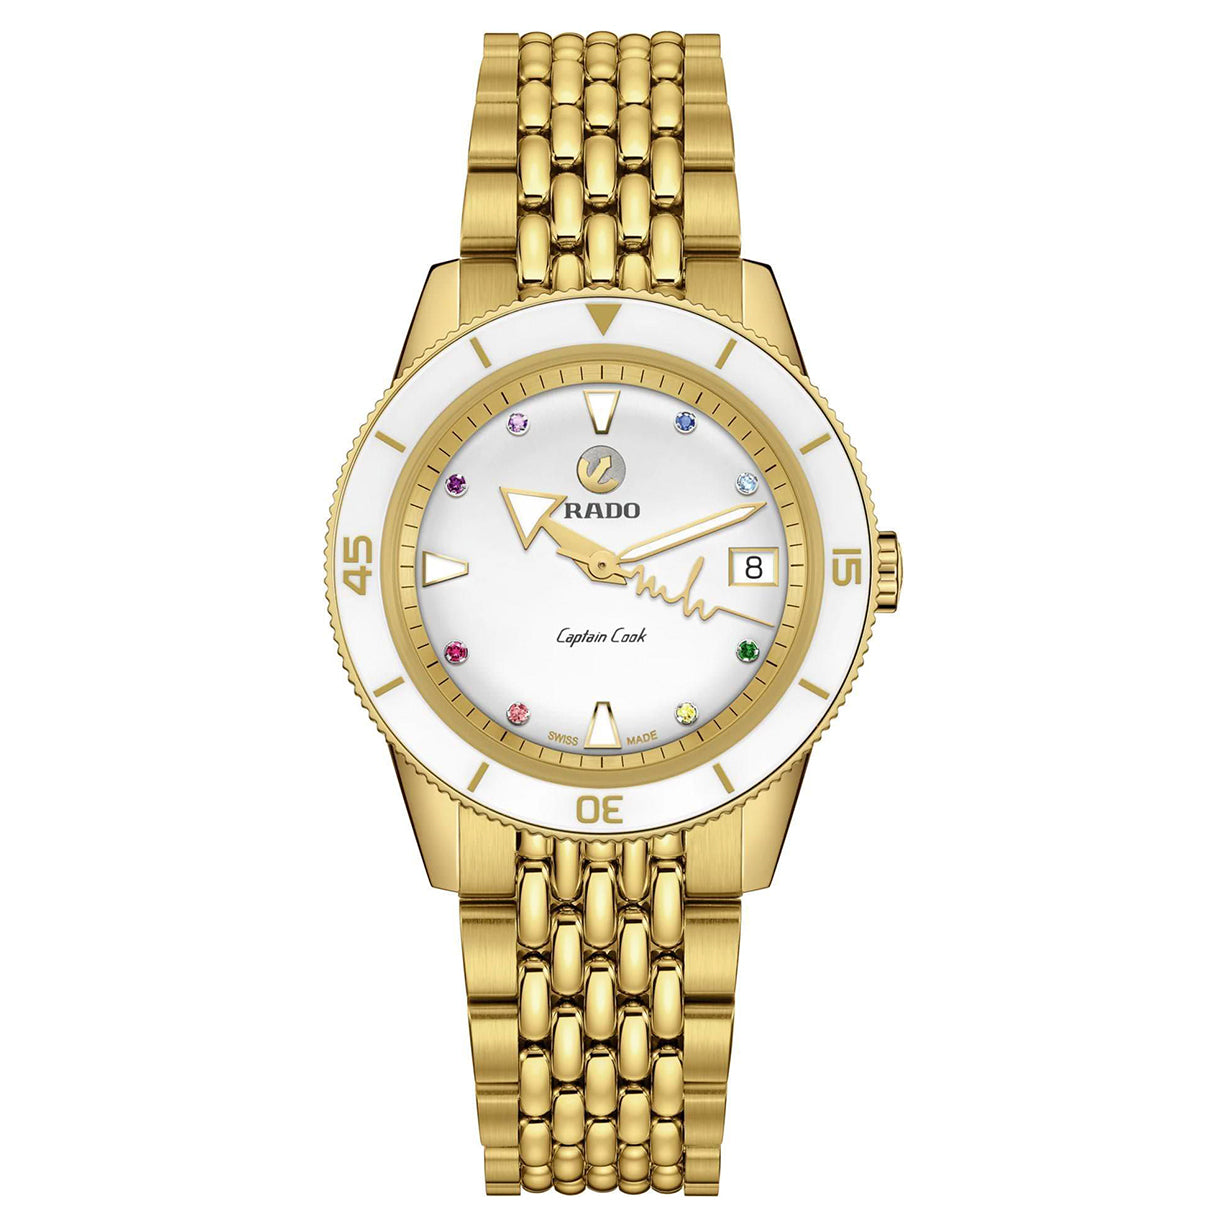 Captain Cook X Marina Hoermanseder Heartbeat Automatic Gold Stainless Steel